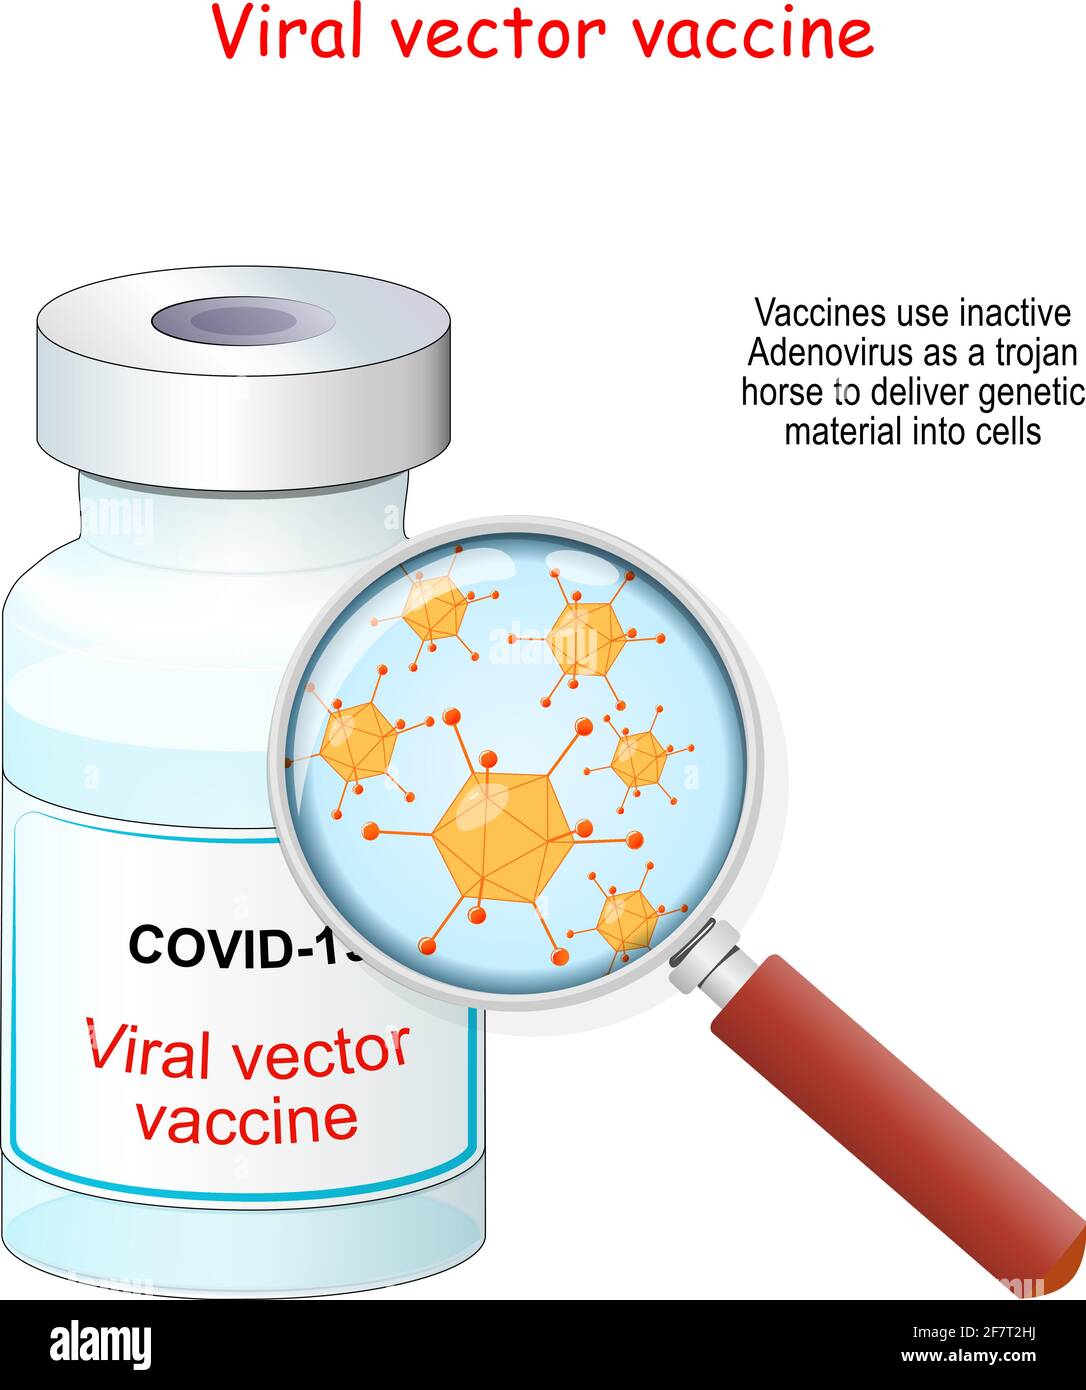 Covid-19 coronavirus. Viral vector vaccine. vaccine vial and magnifying glass with magnification of Adenoviruses that use to deliver genetic material Stock Vector